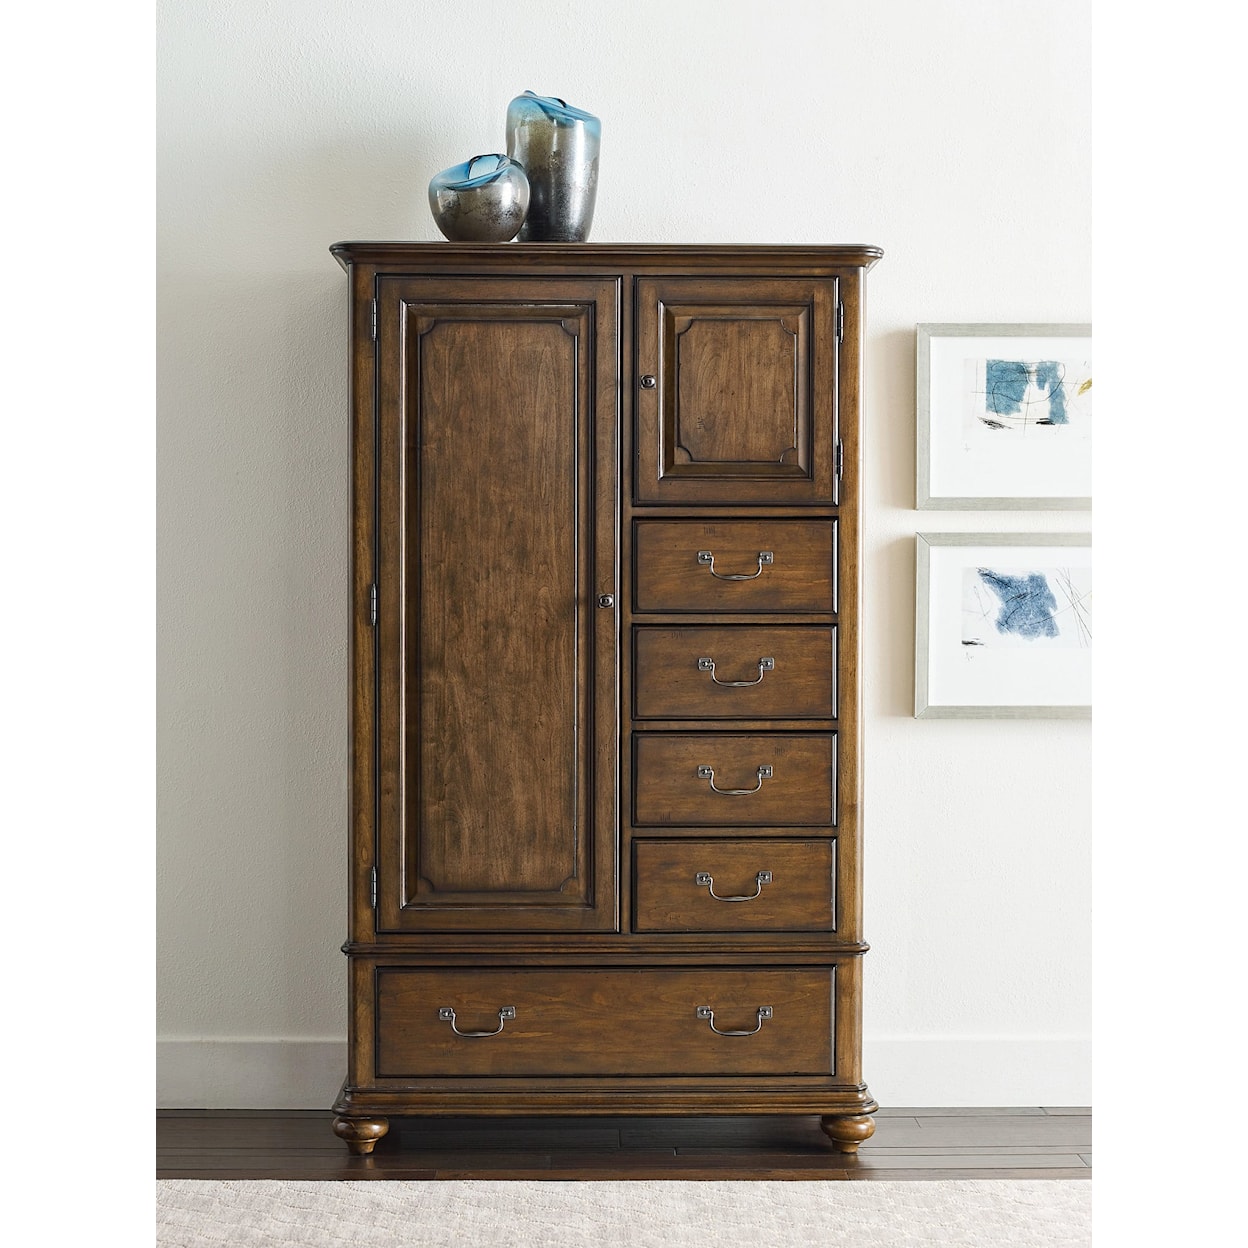 Kincaid Furniture Commonwealth Witham Gentlemen's Chest